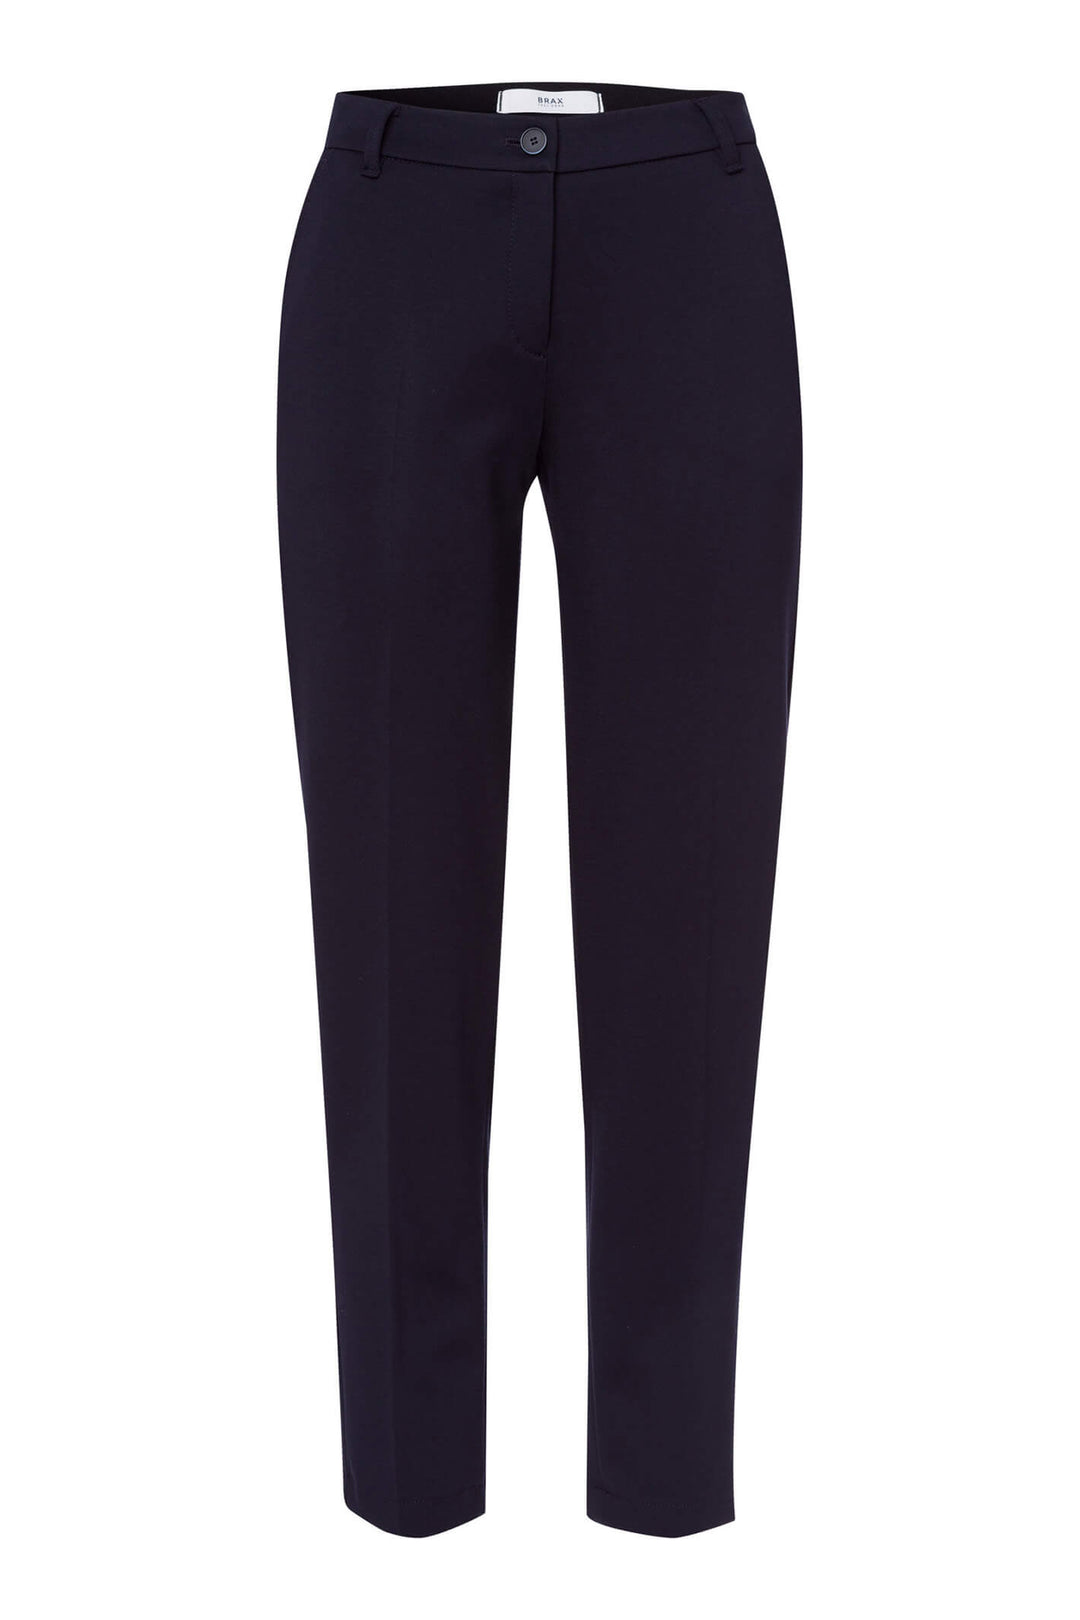 Brax Maron 75-5657/22 Navy 7/8 Flat Front Trousers - Shirley Allum Boutique